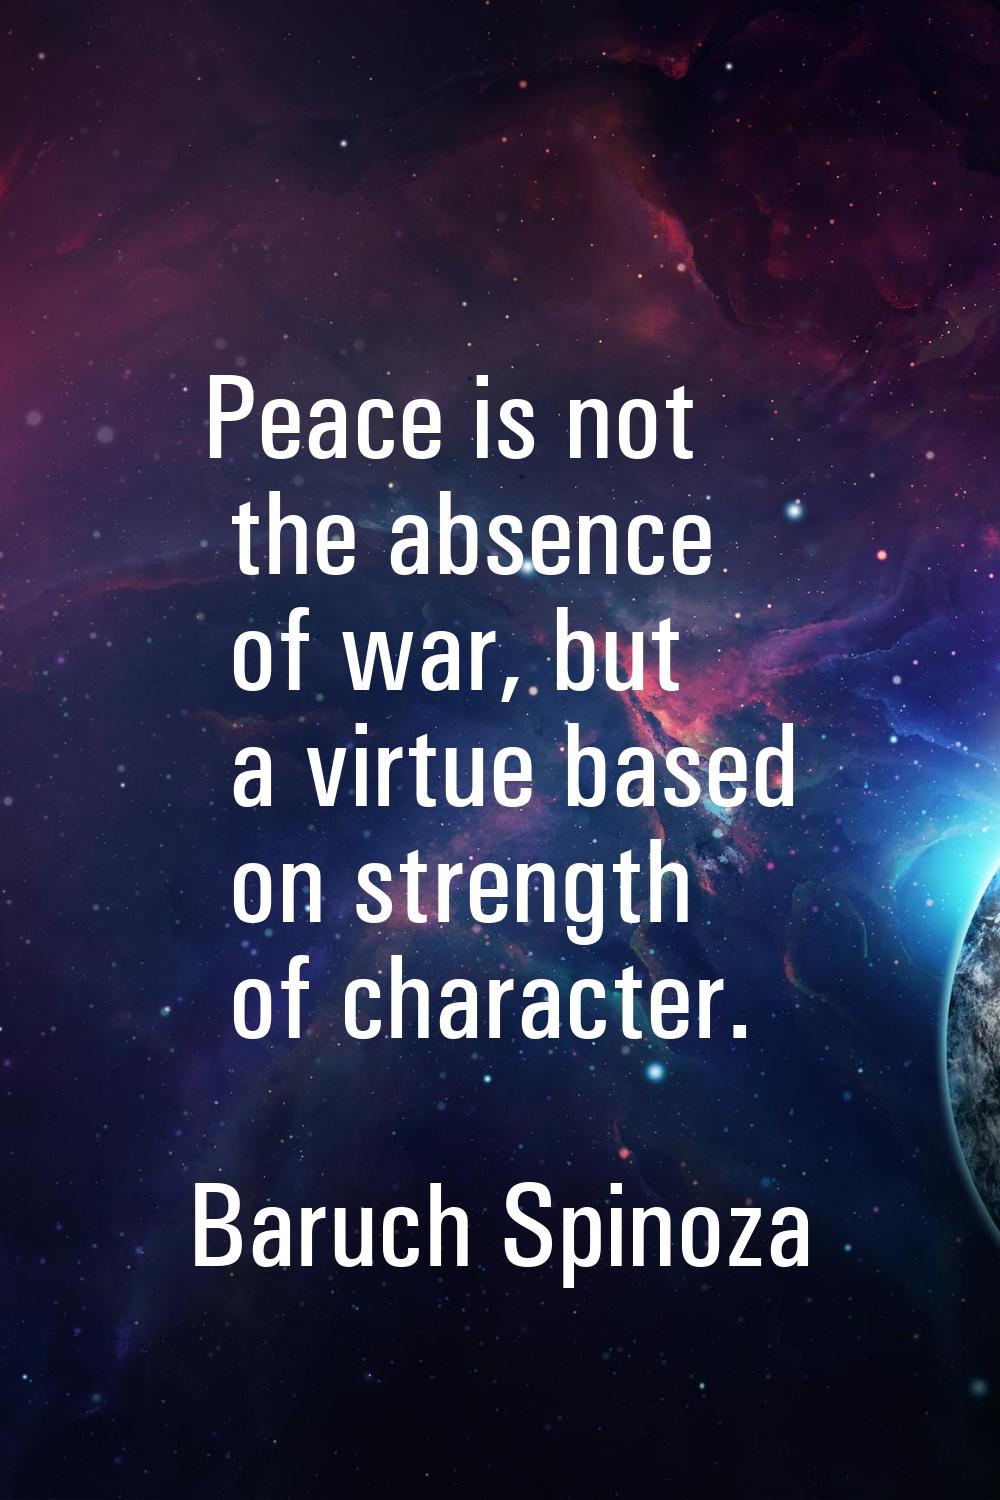 Peace is not the absence of war, but a virtue based on strength of character.